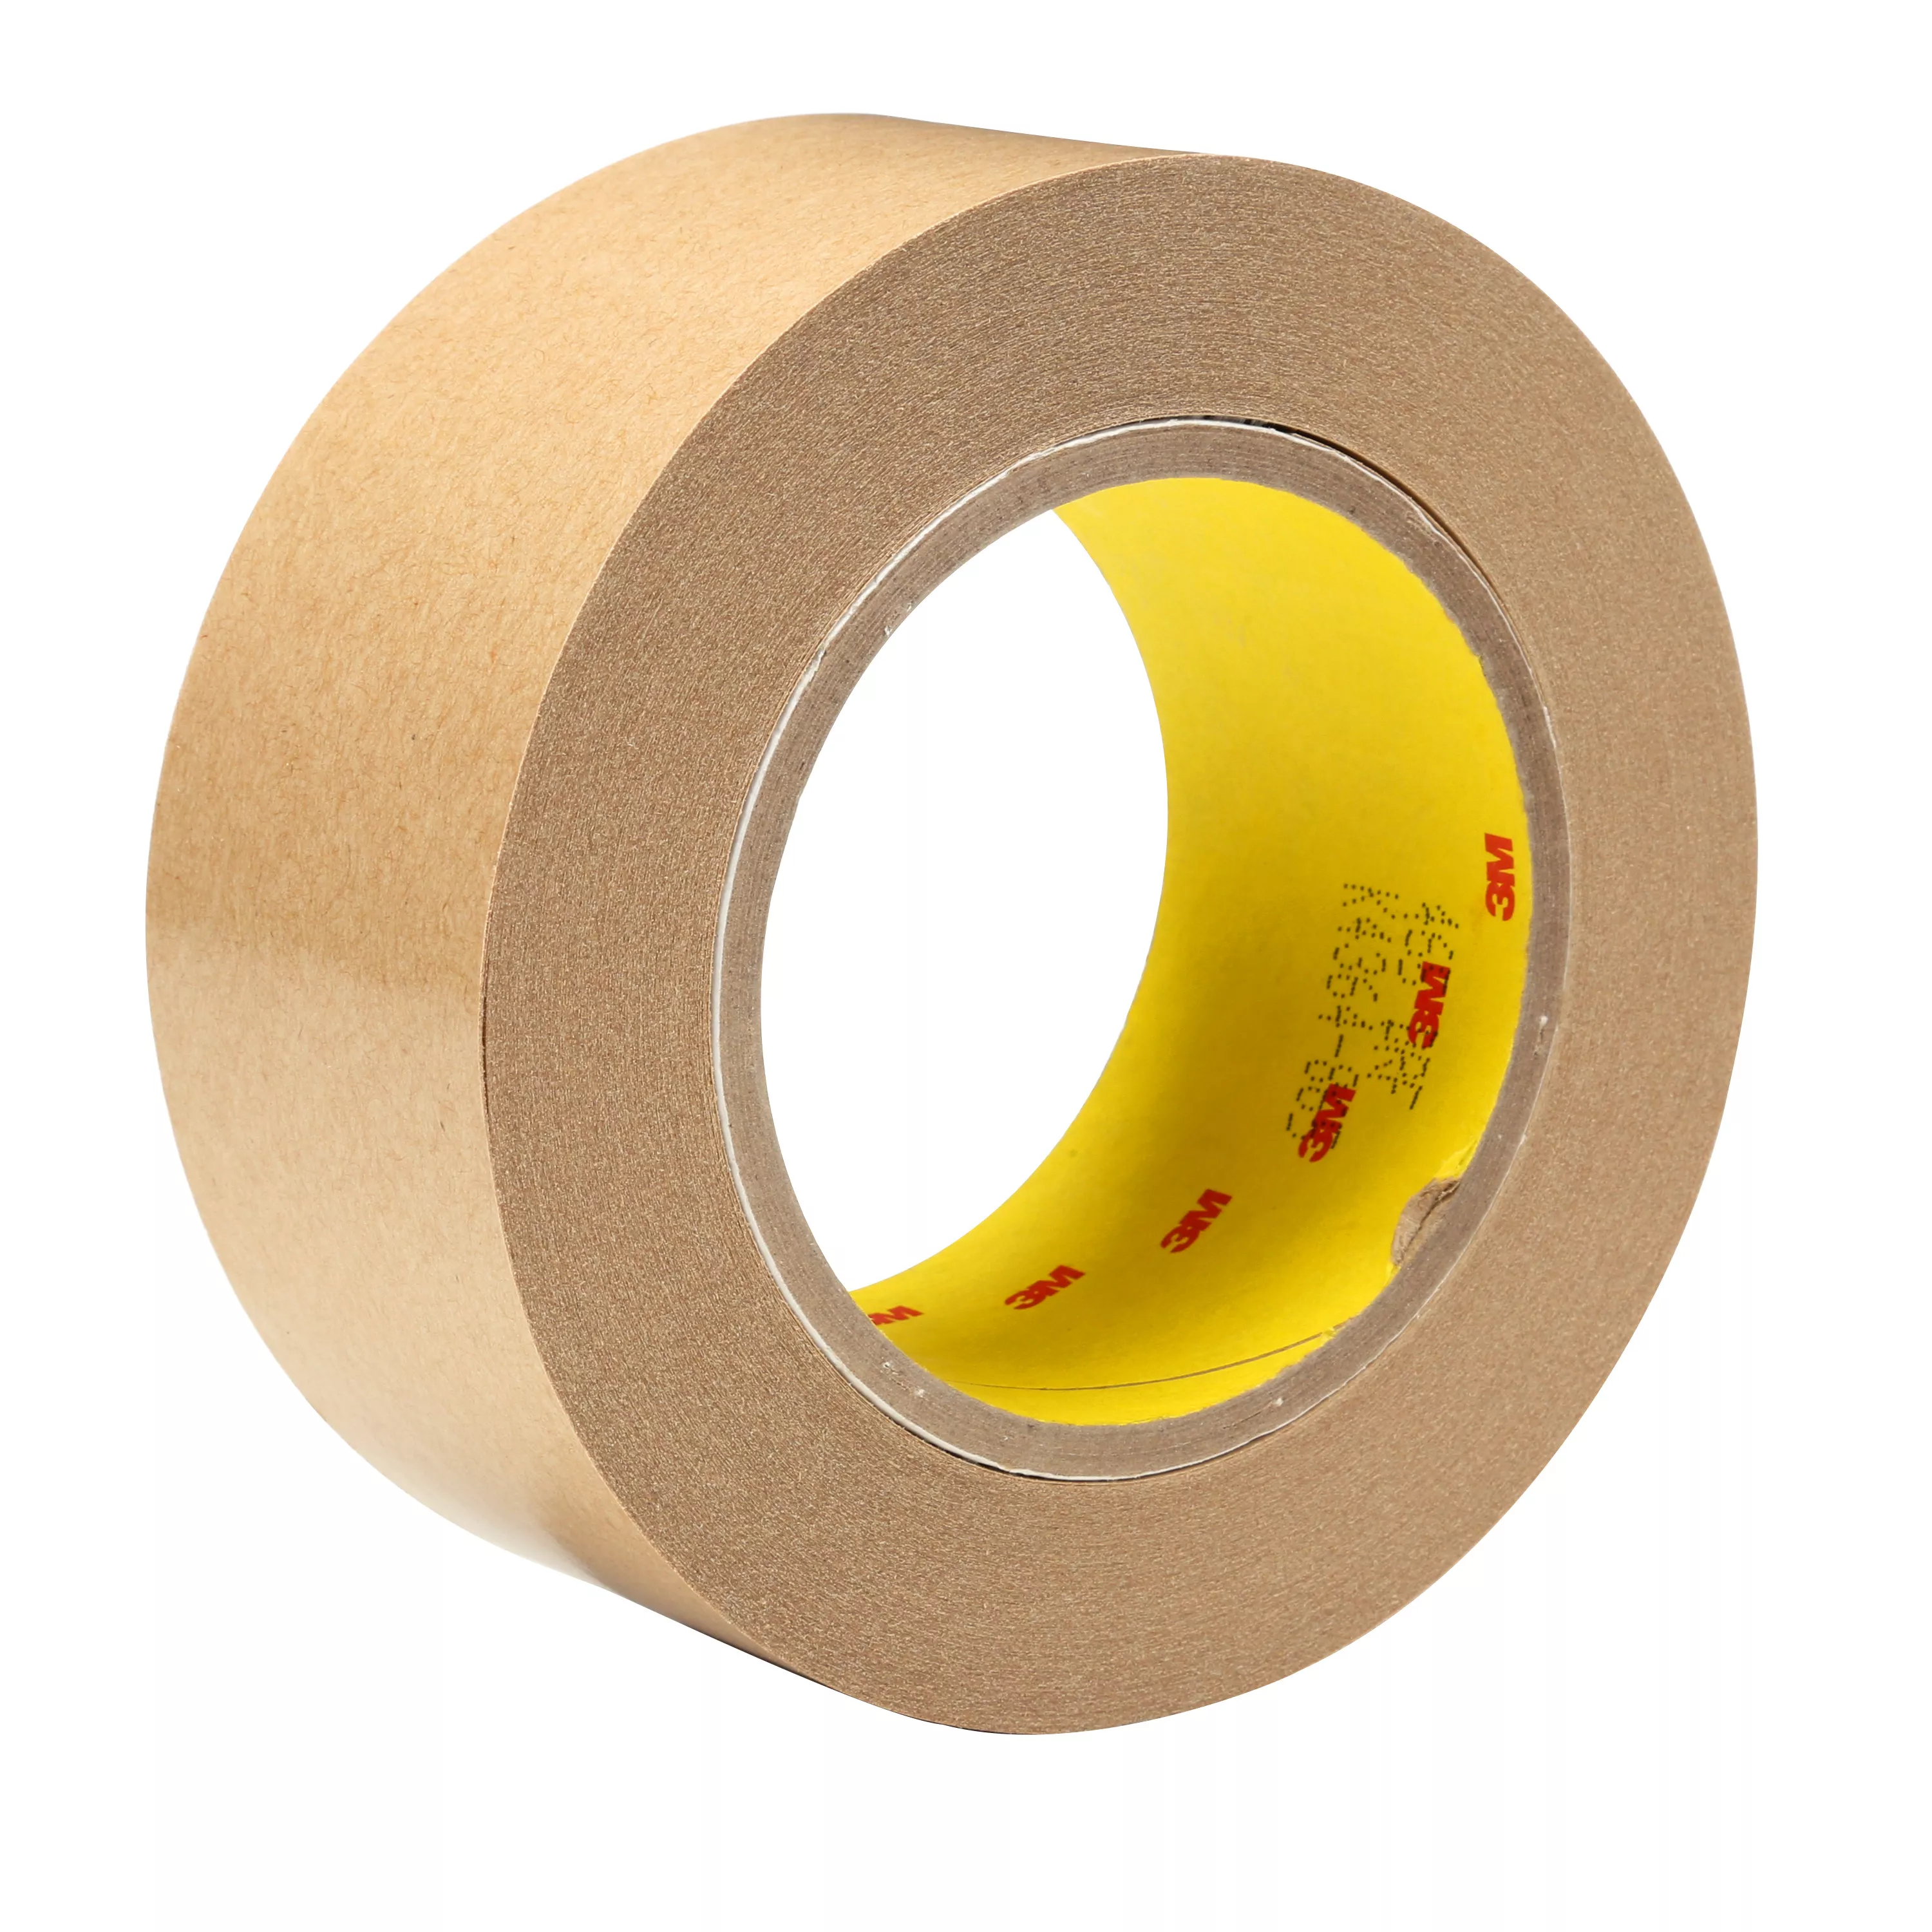 3M™ Adhesive Transfer Tape 465, Clear, 2 in x 60 yd, 2 mil, 24 Roll/Case